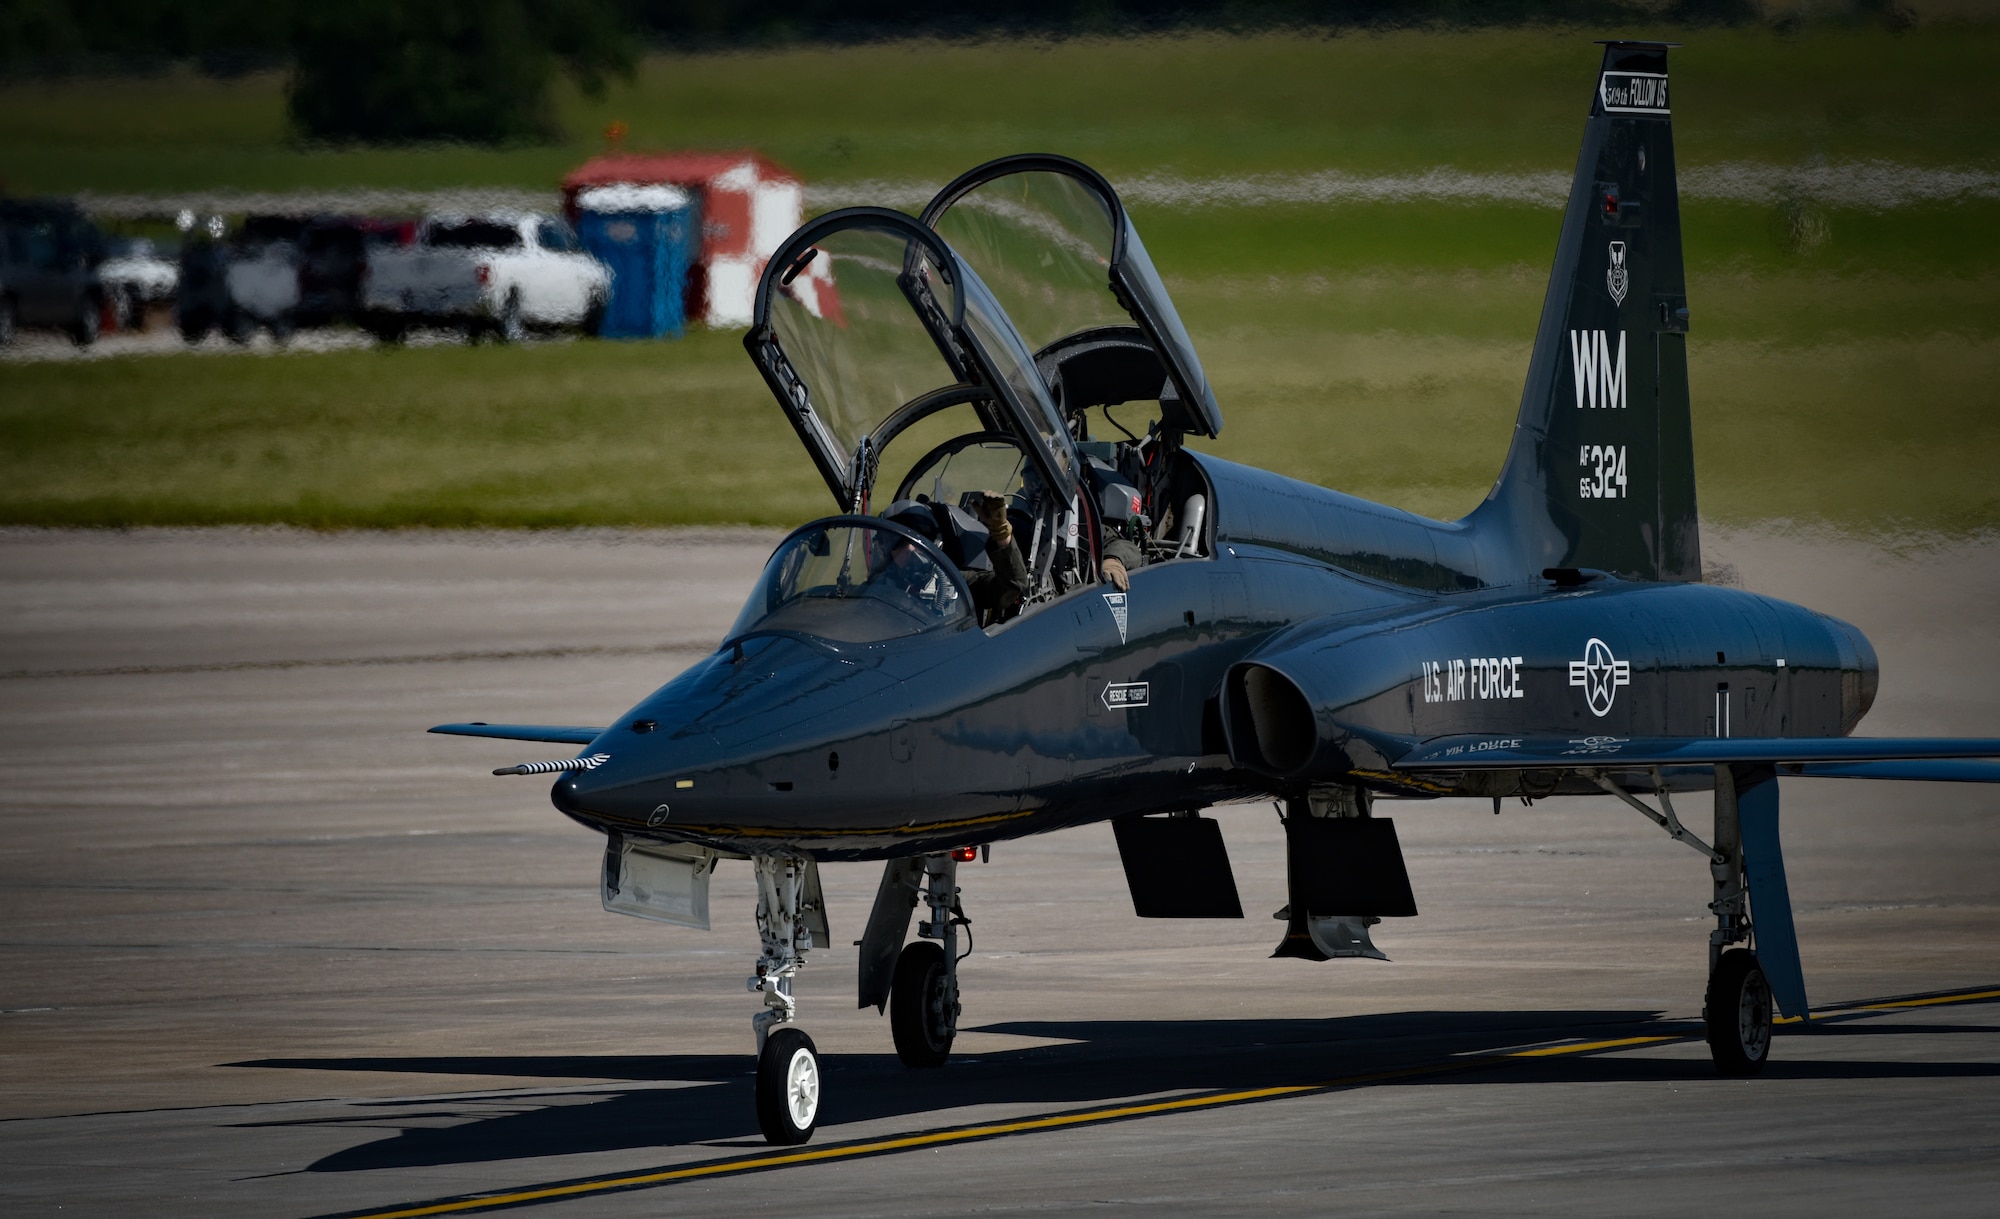 A T-38 Talon pilot assigned to the 13th Bomb Squadron waves to air show spectators as he taxis his aircraft in front of the crowed during the 2019 Wings over Whiteman Air & Space Show at Whiteman Air Force Base, Missouri, June 15, 2019. The T-38 is a crucial asset utilized to maintain airmanship and tactics for B-2 pilots. B-2 pilots assigned to the 13th Bomb Squadron demonstrated their jet flying skills for more than 100,000 visitors during the air show weekend. (U.S. Air Force photo by Tech. Sgt. Alexander W. Riedel)